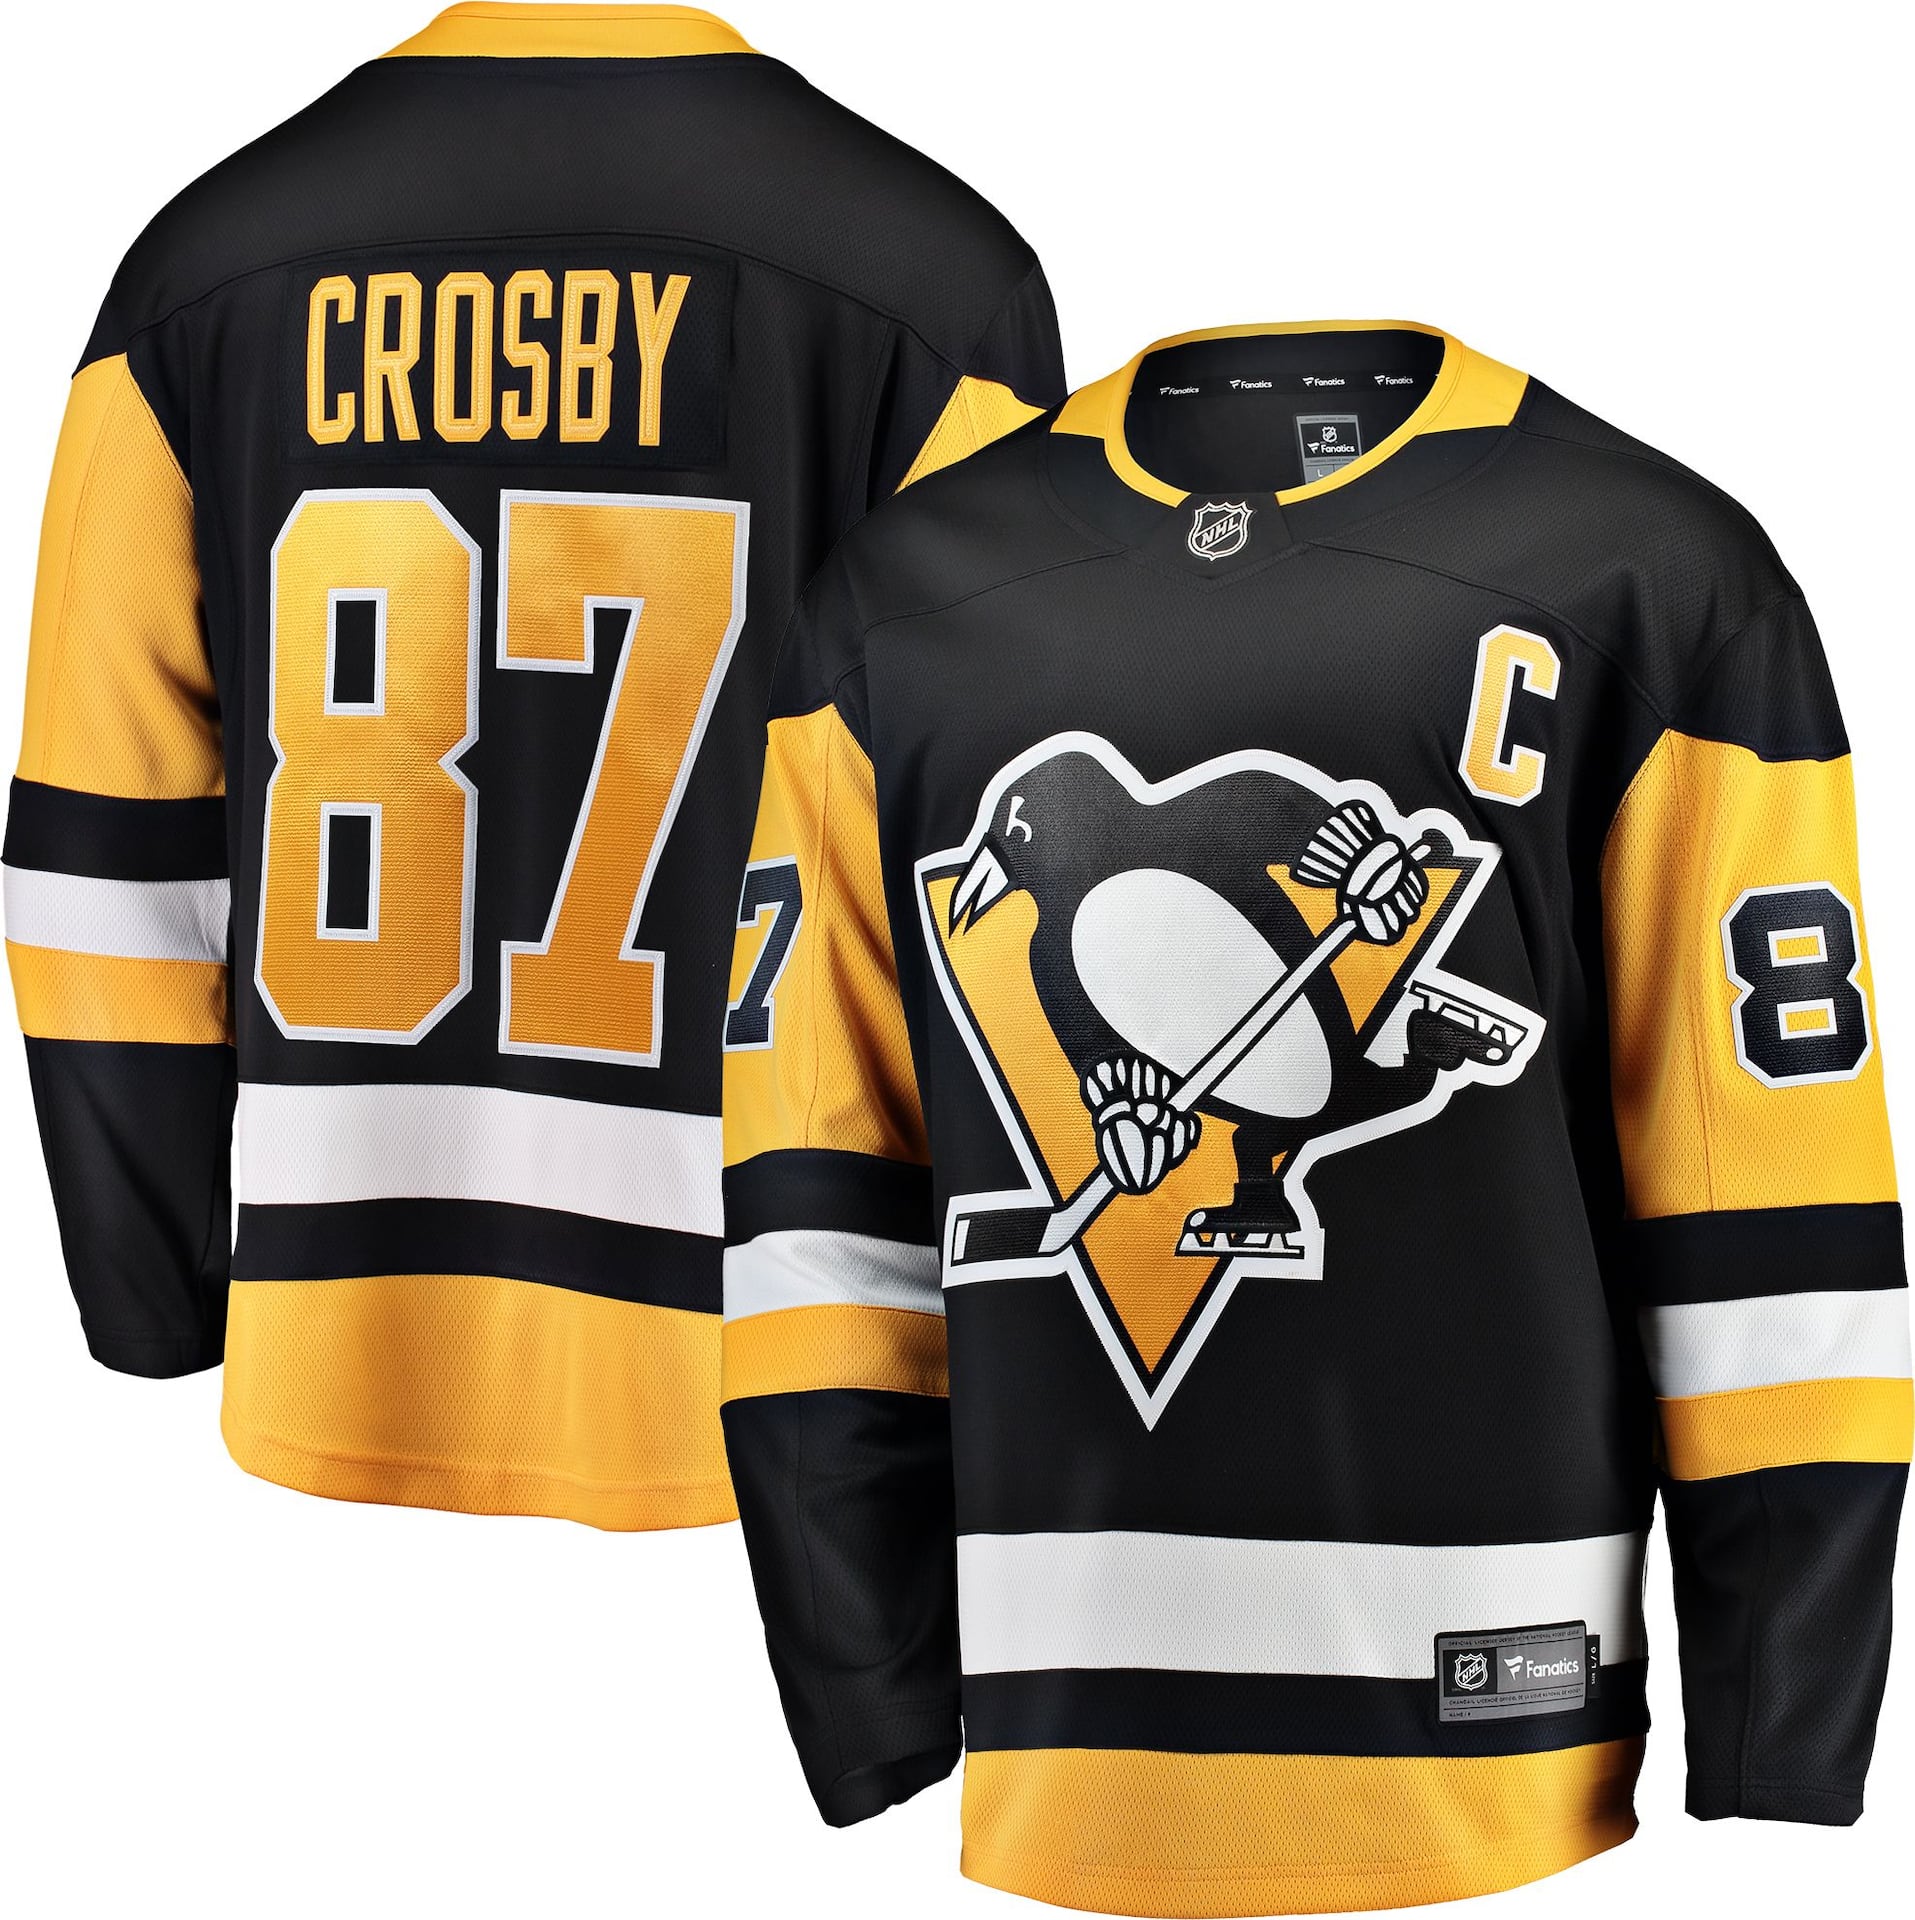 Black and Gold: Sidney Crosby is the game's best player